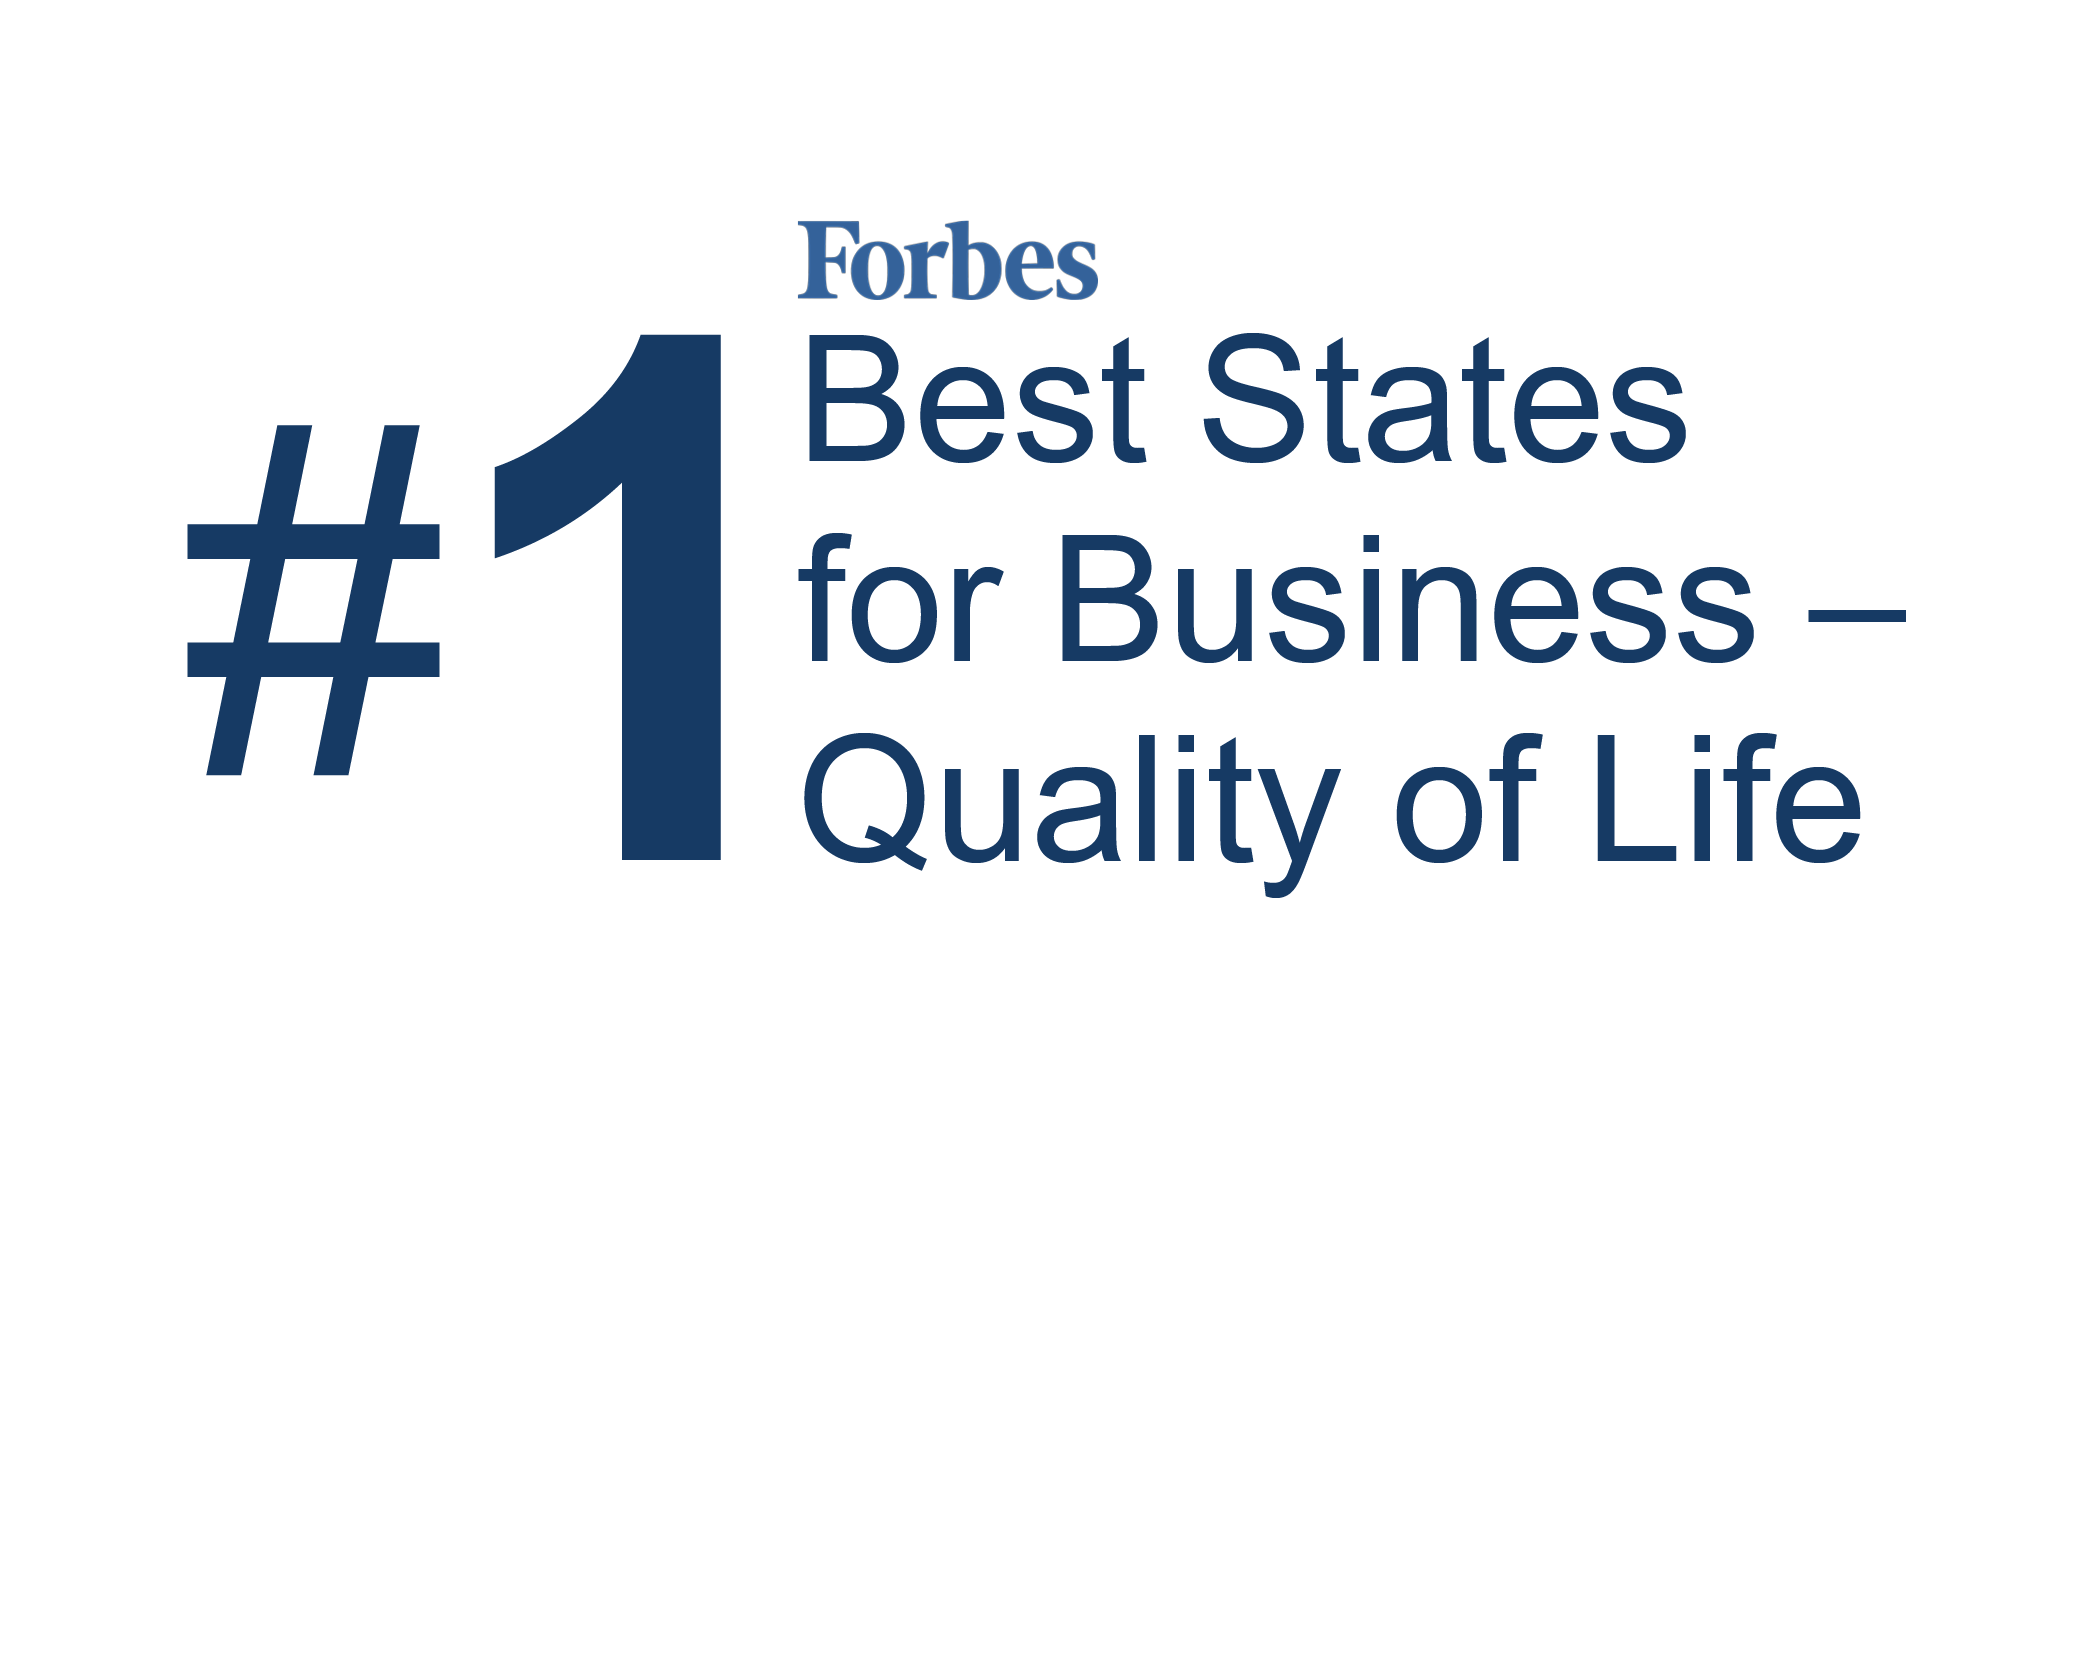 Forbes Best State for Business-Quality of Life